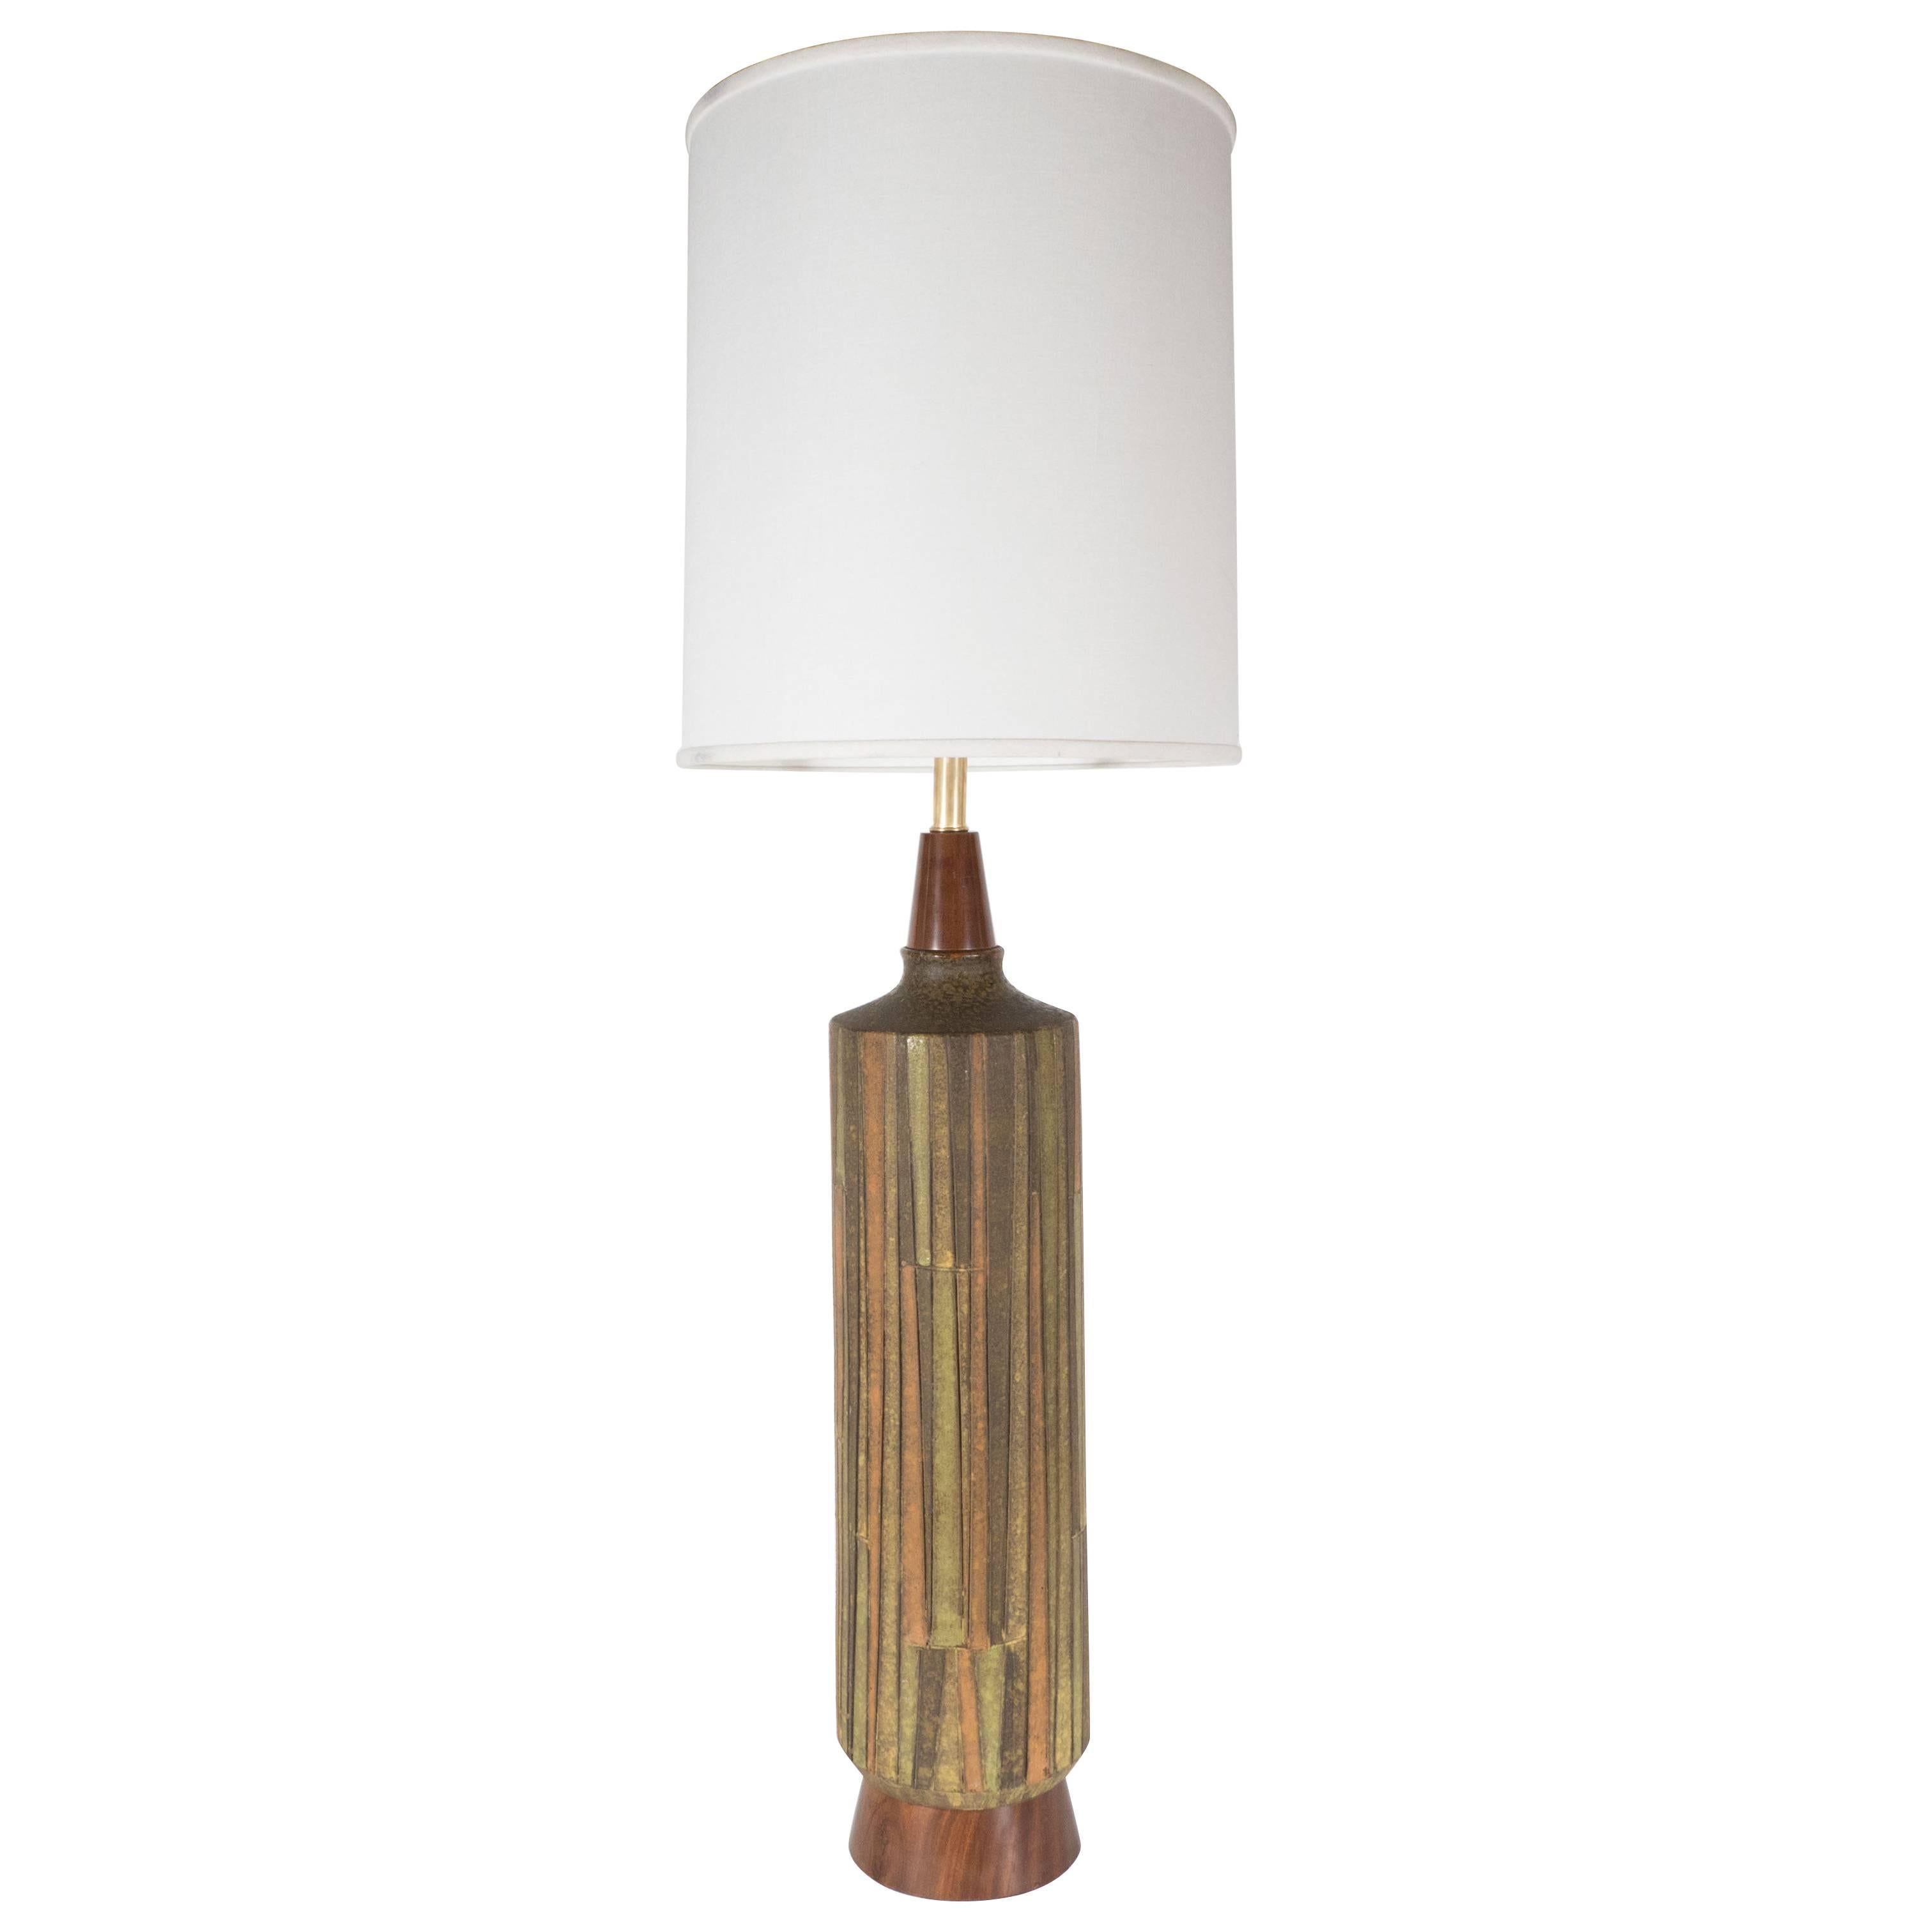 Mid-Century Organic Modern Ceramic & Walnut Table Lamp in Earth Tones by Bitossi For Sale